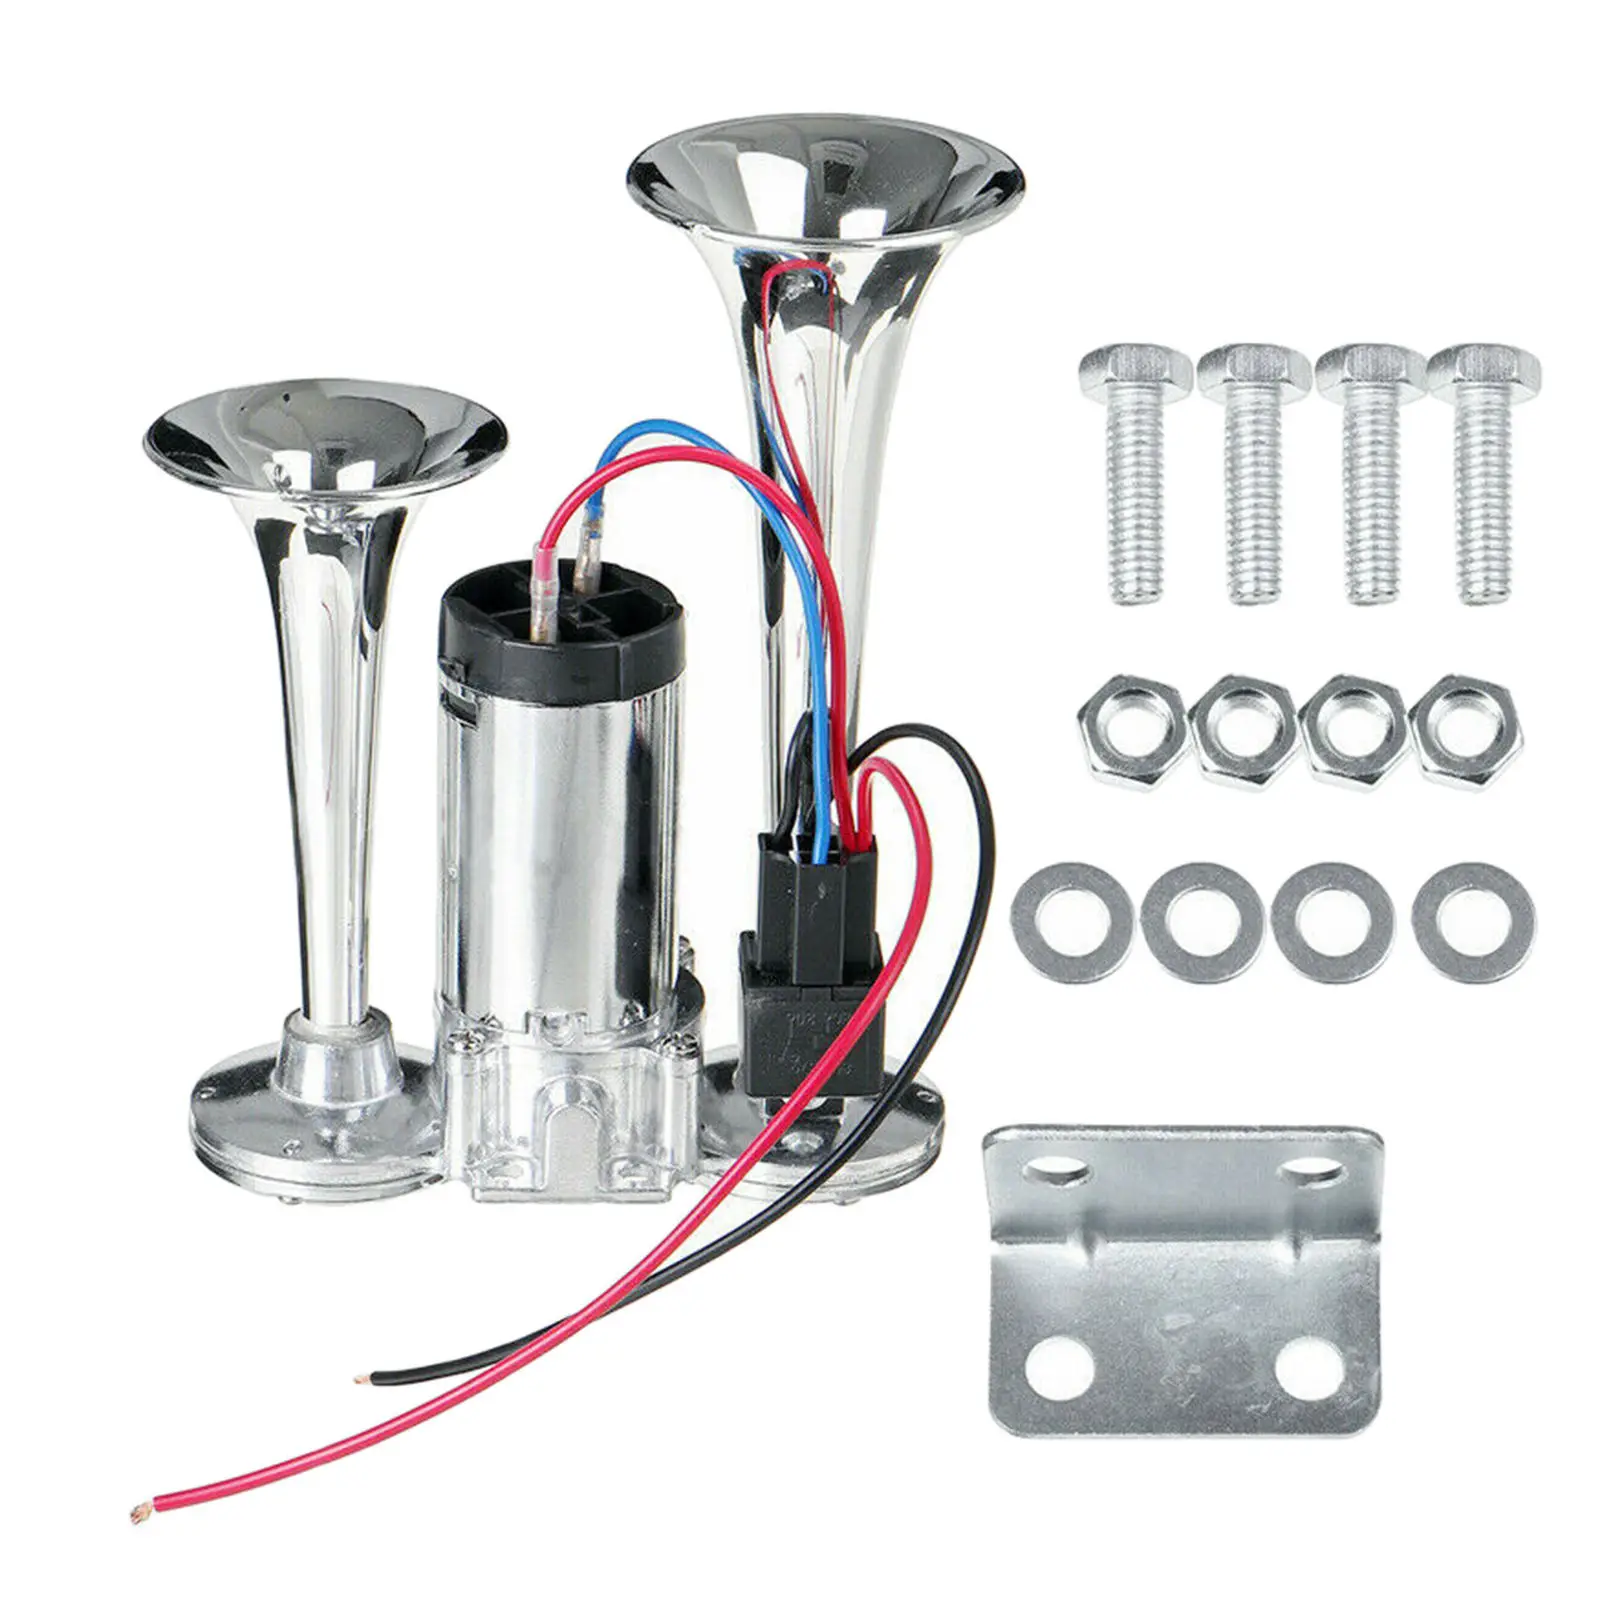 600DB 12V Dual Trumpet Super Loud Car Air Horn Speaker with Compressor Set, Easy to Install